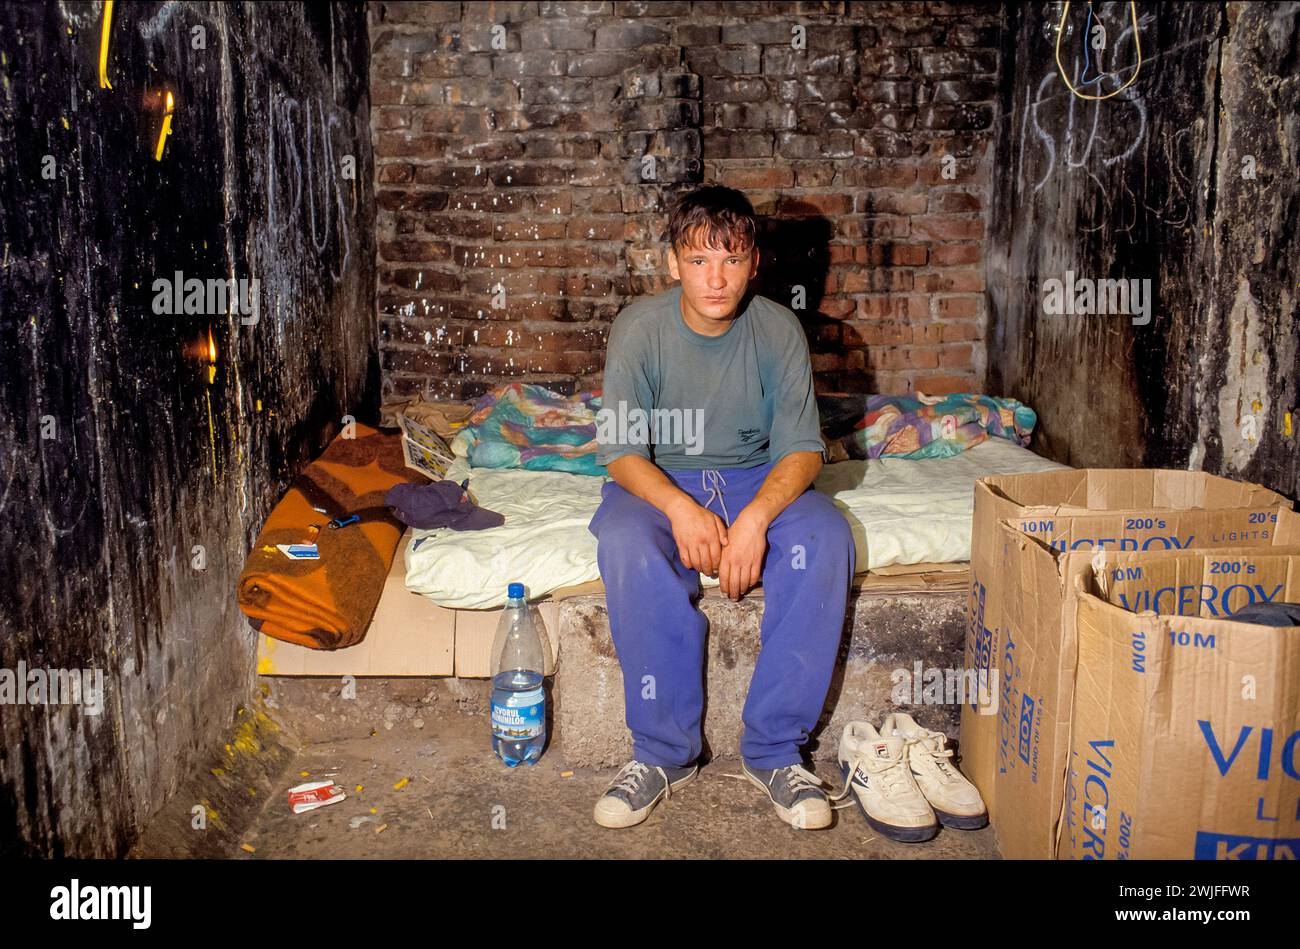 Romania, Bucarest. Homeless youth found shelter in a sewer. Stock Photo